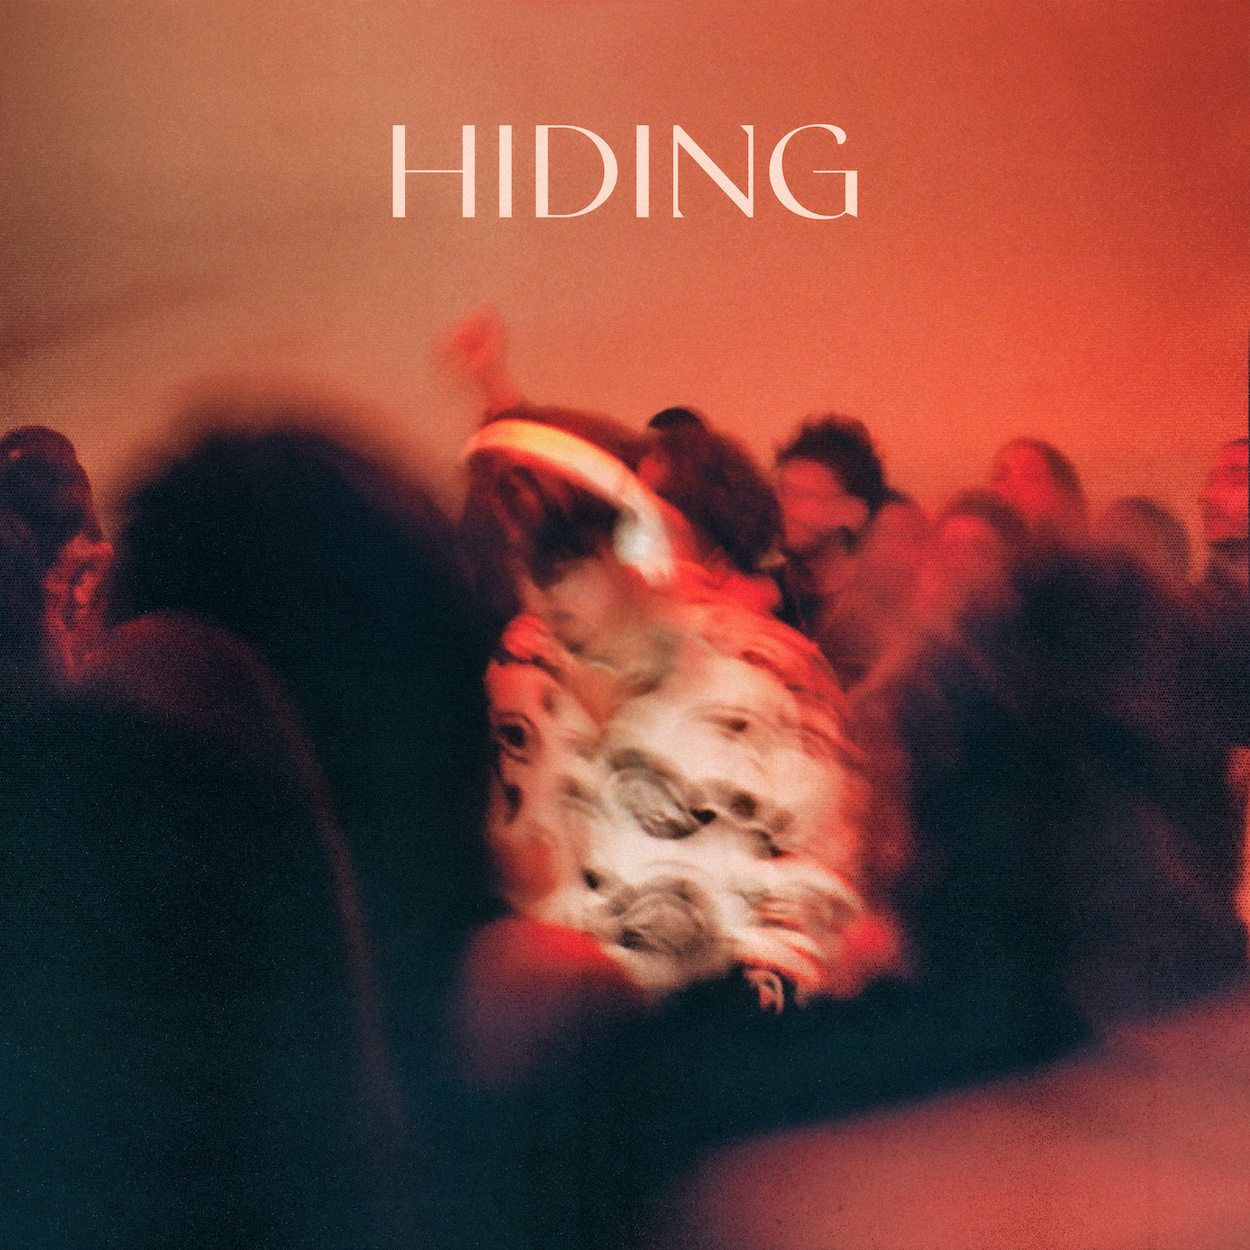 AVAION lays down intimate ballad 'Hiding' – out now on Sony Music